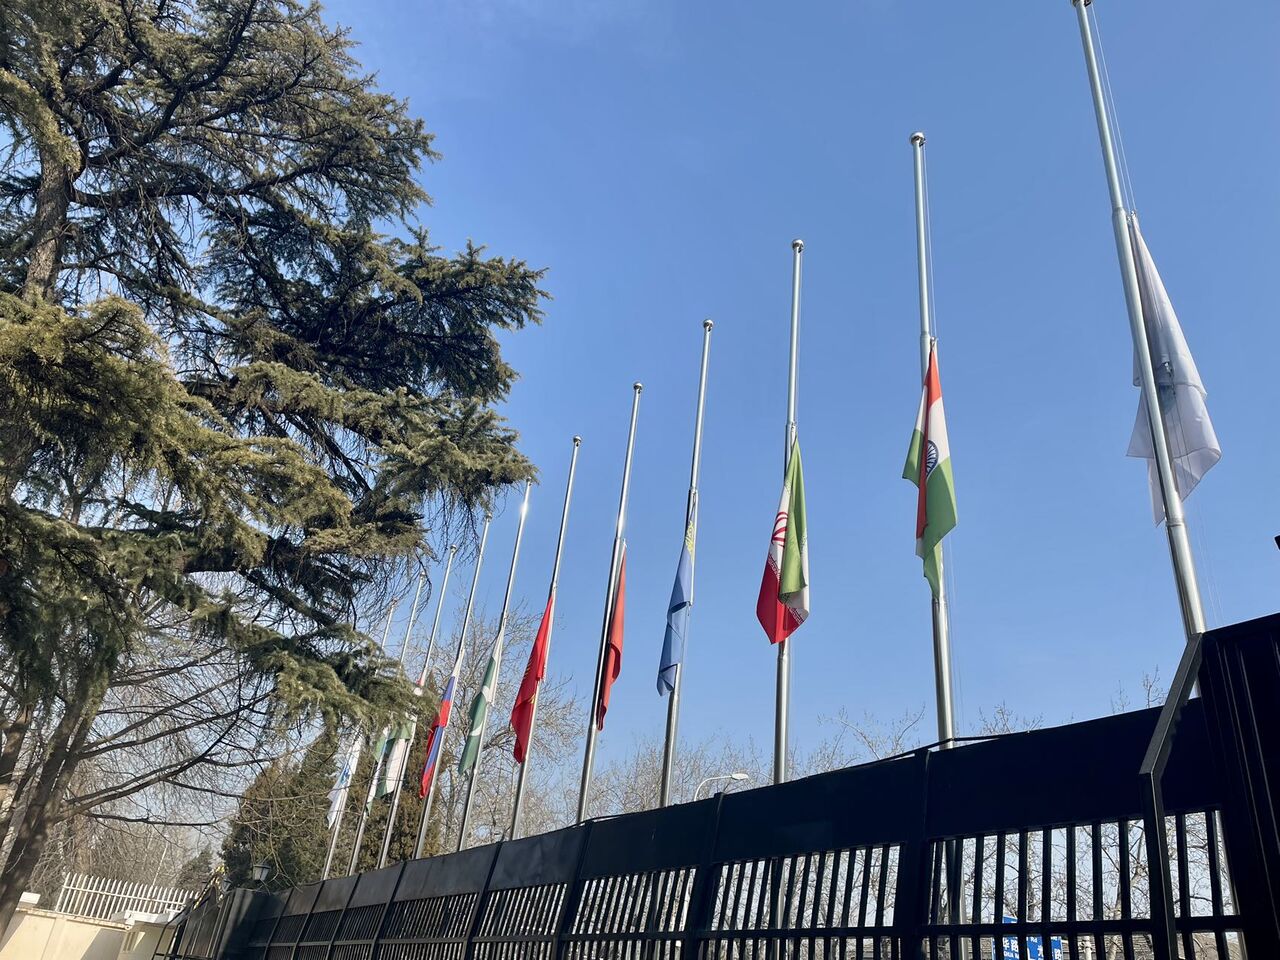 SCO lowers flags to half-mast in respect for victims of Iran attack